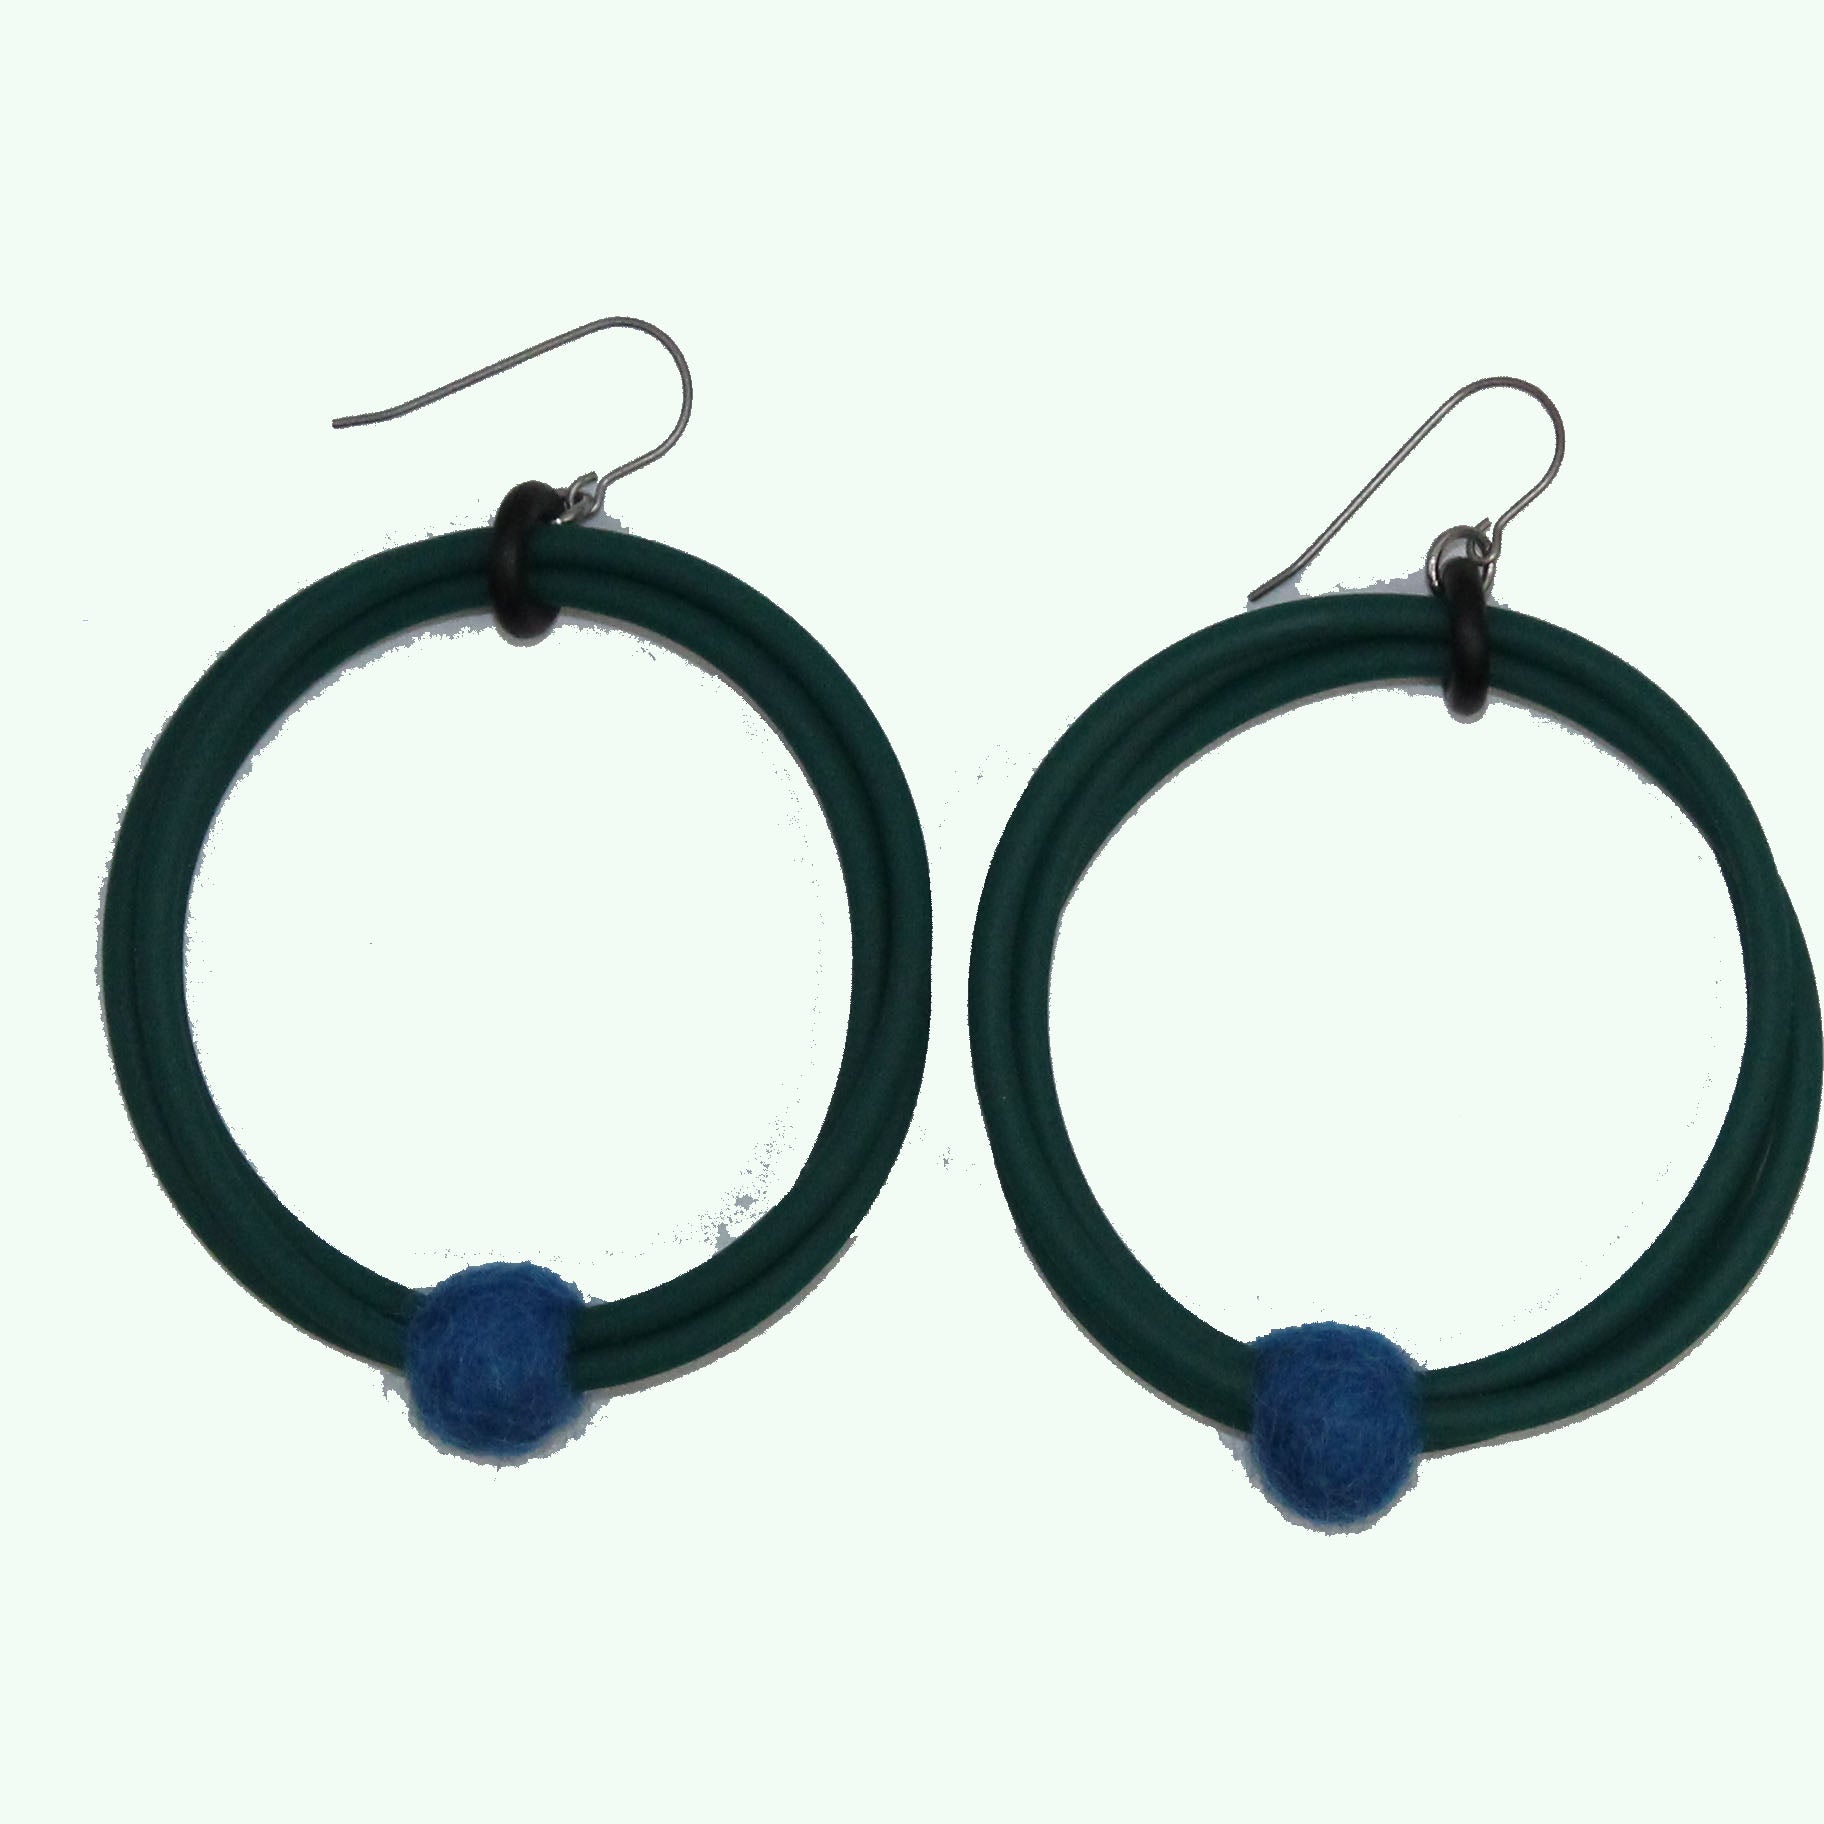 Frank Ideas Earrings, Round and Round, Green/Blue